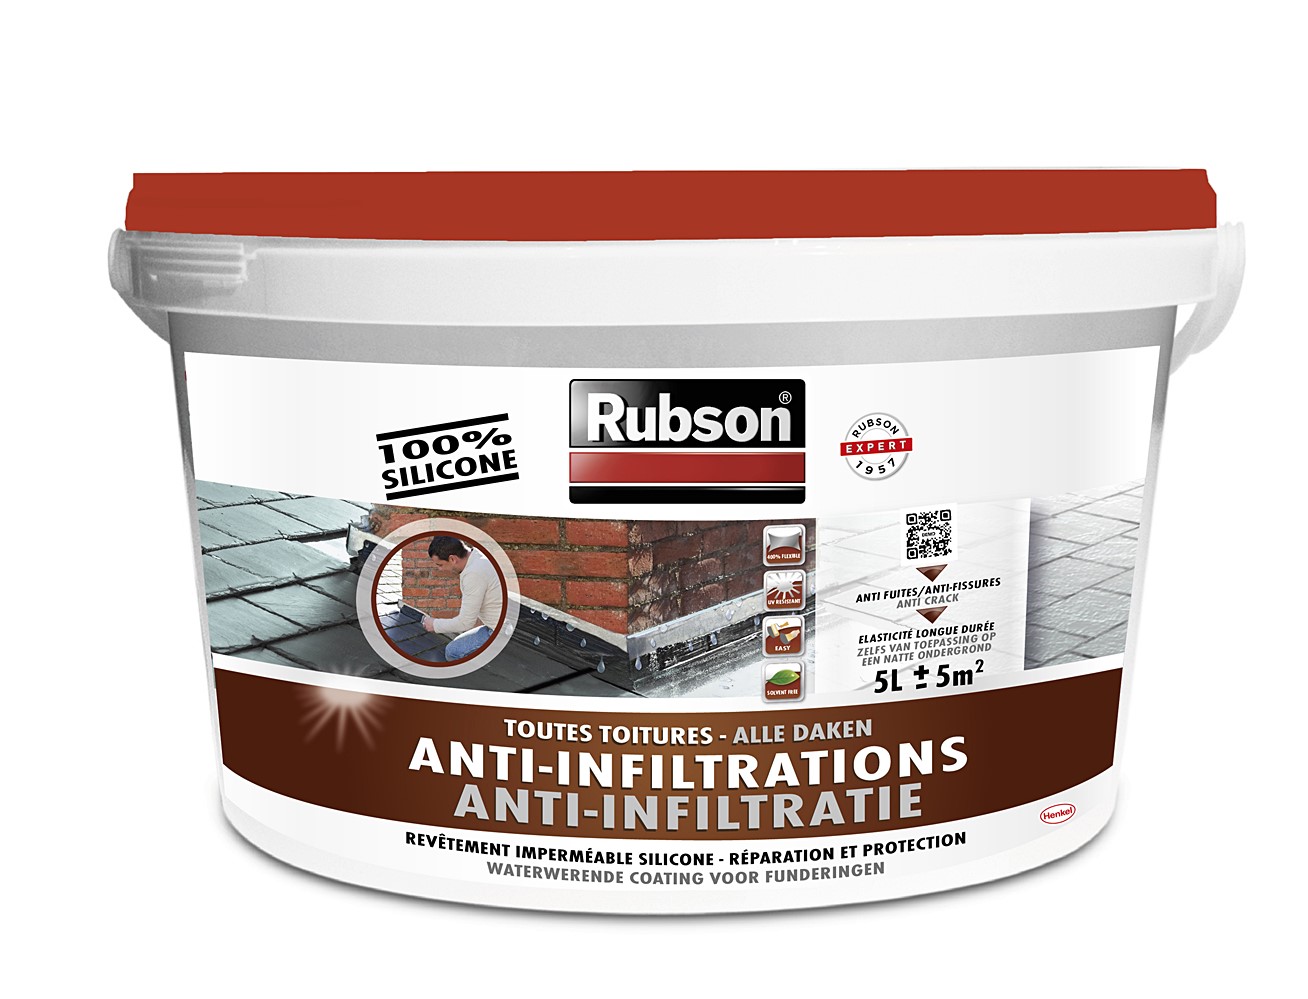 RUBSON Toitures Anti-infiltrations Terre Cuite 1kg